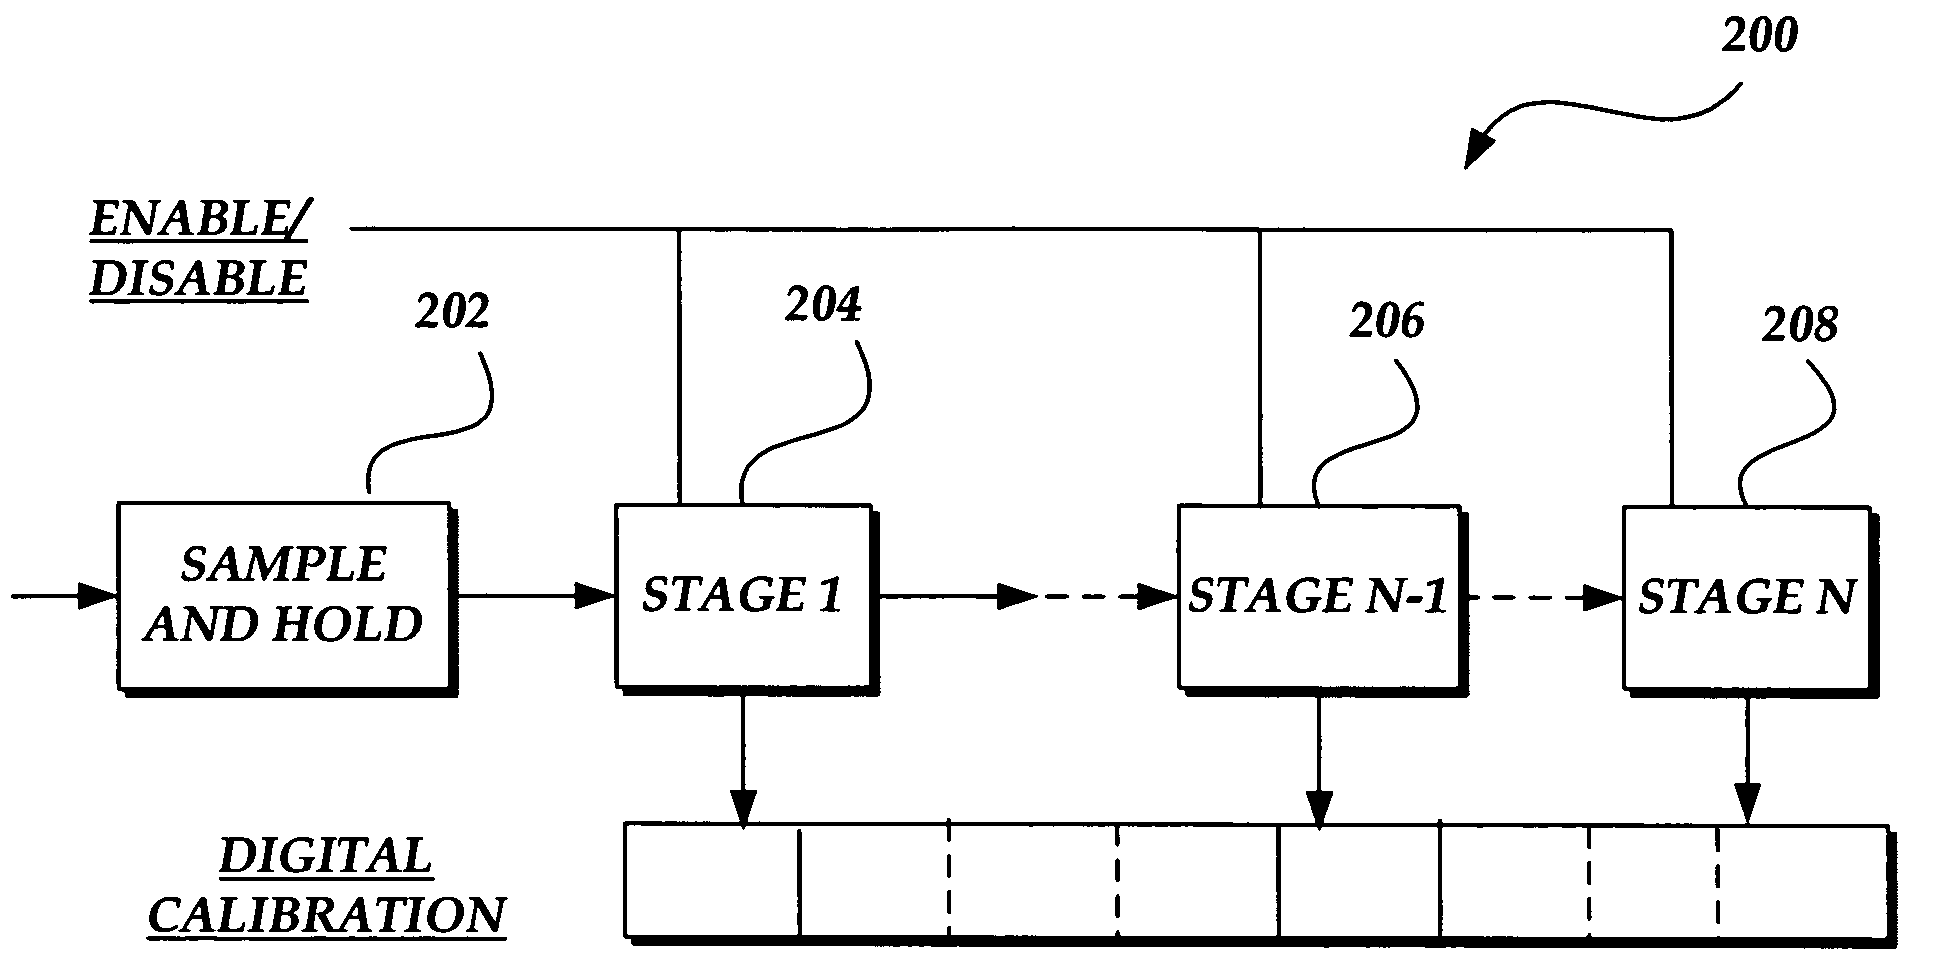 Pipelined analog to digital converter that is configurable based on mode and strength of received signal